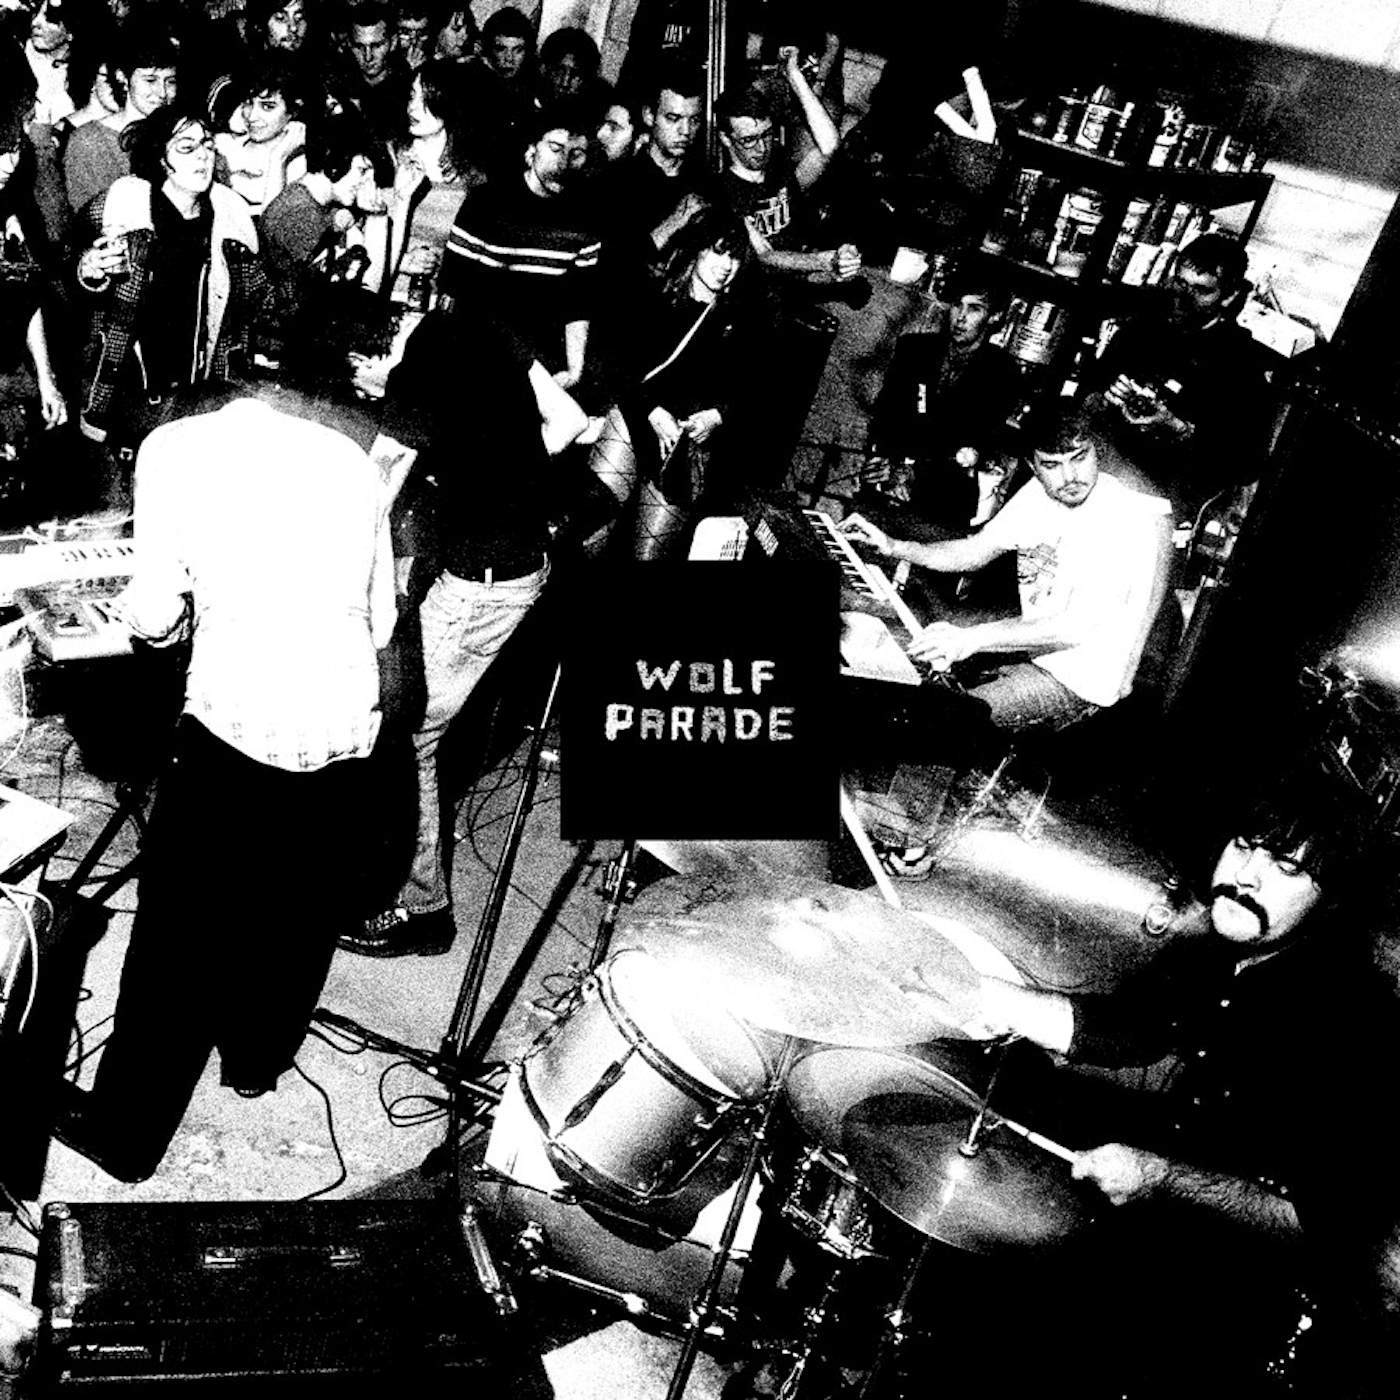 Wolf Parade APOLOGIES TO THE QUEEN MARY: DELUXE Vinyl Record